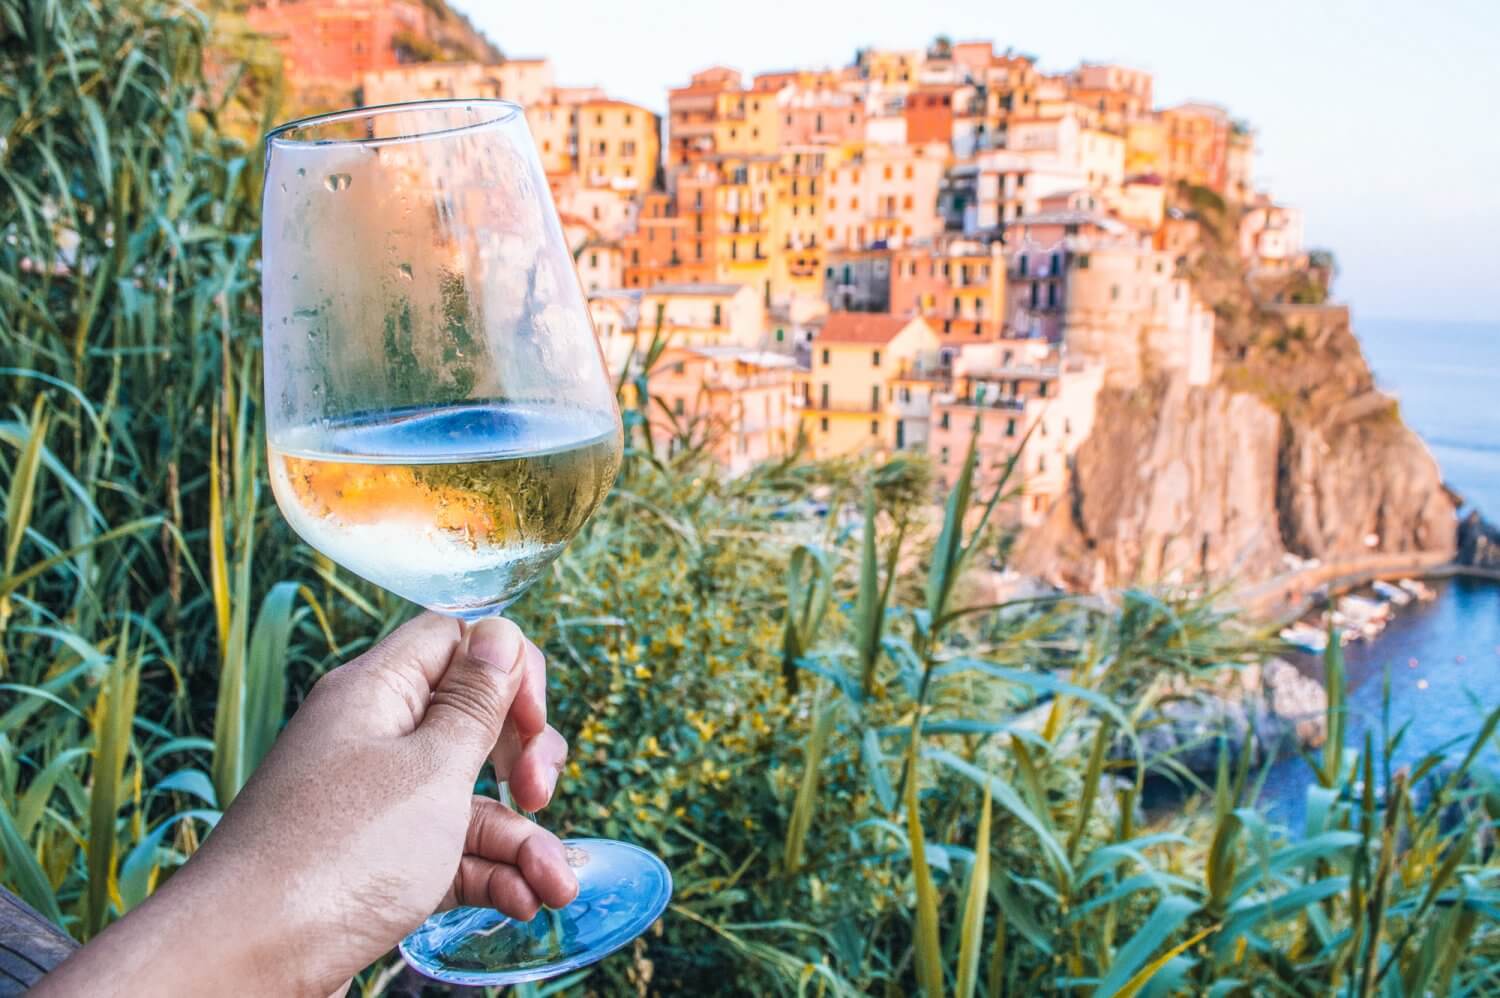 Wow - the best Cinque Terre, Italy guide out there! Recaps all the important must-dos during a Cinque Terre visit. Don't miss this if you're planning on travelling to Italy. #Italy #CinqueTerre #Wanderlust